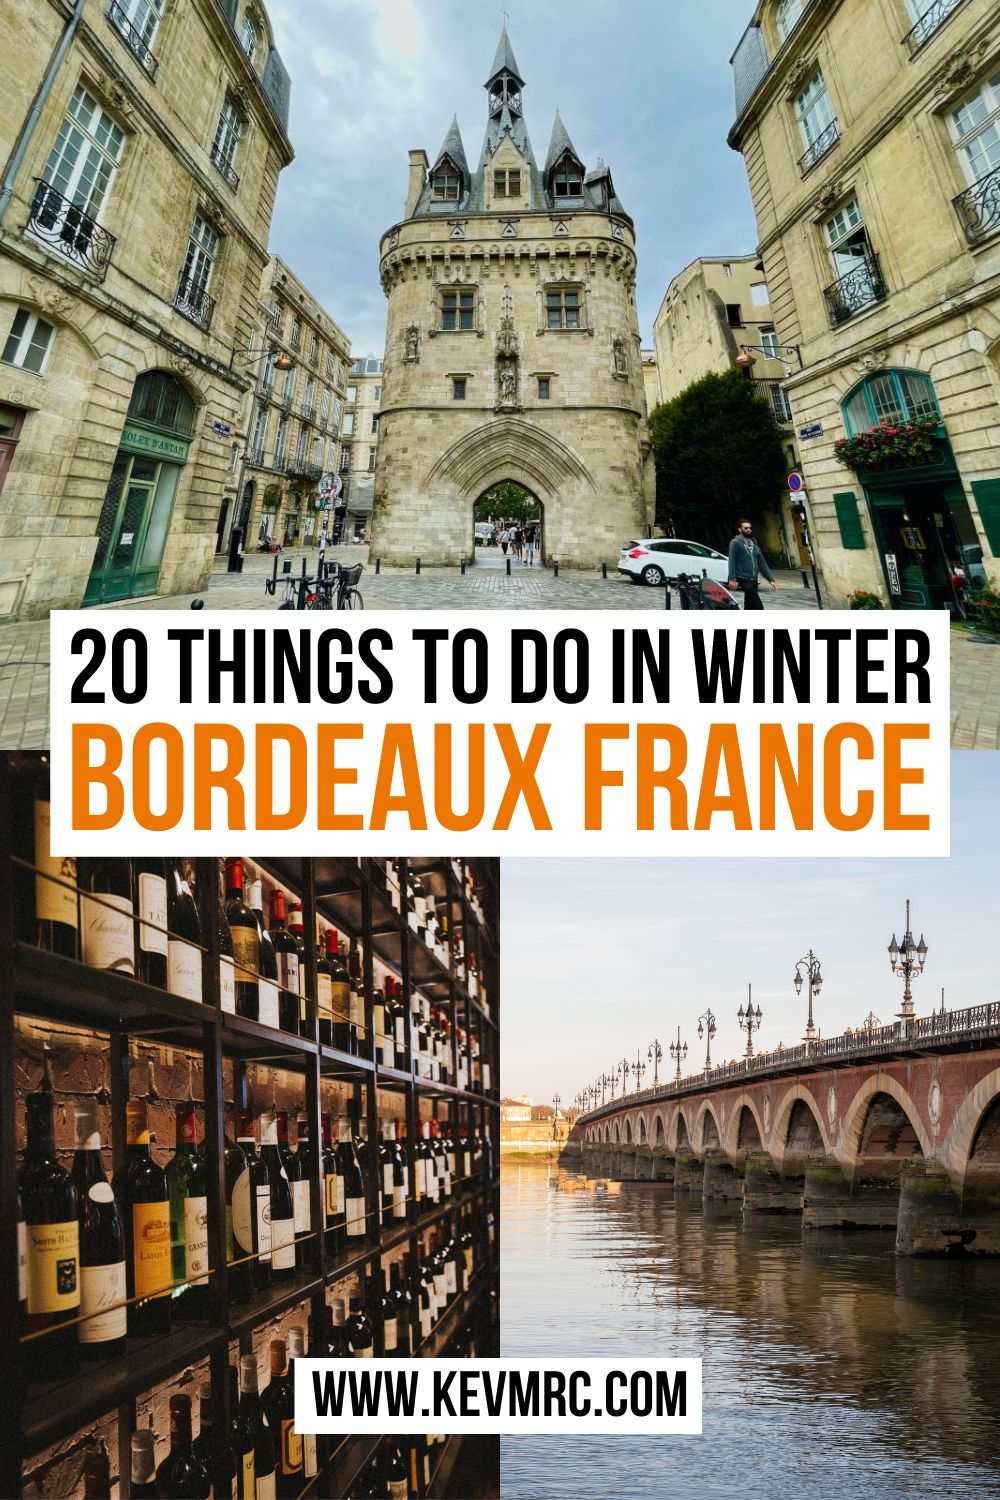 Wondering what to to in Bordeaux in winter? Find out here the 20 best things to do in Bordeaux in winter, with weather info, tips, and more! things to do in bordeaux france | bordeaux france travel guide | what to do in bordeaux france travel #bordeaux